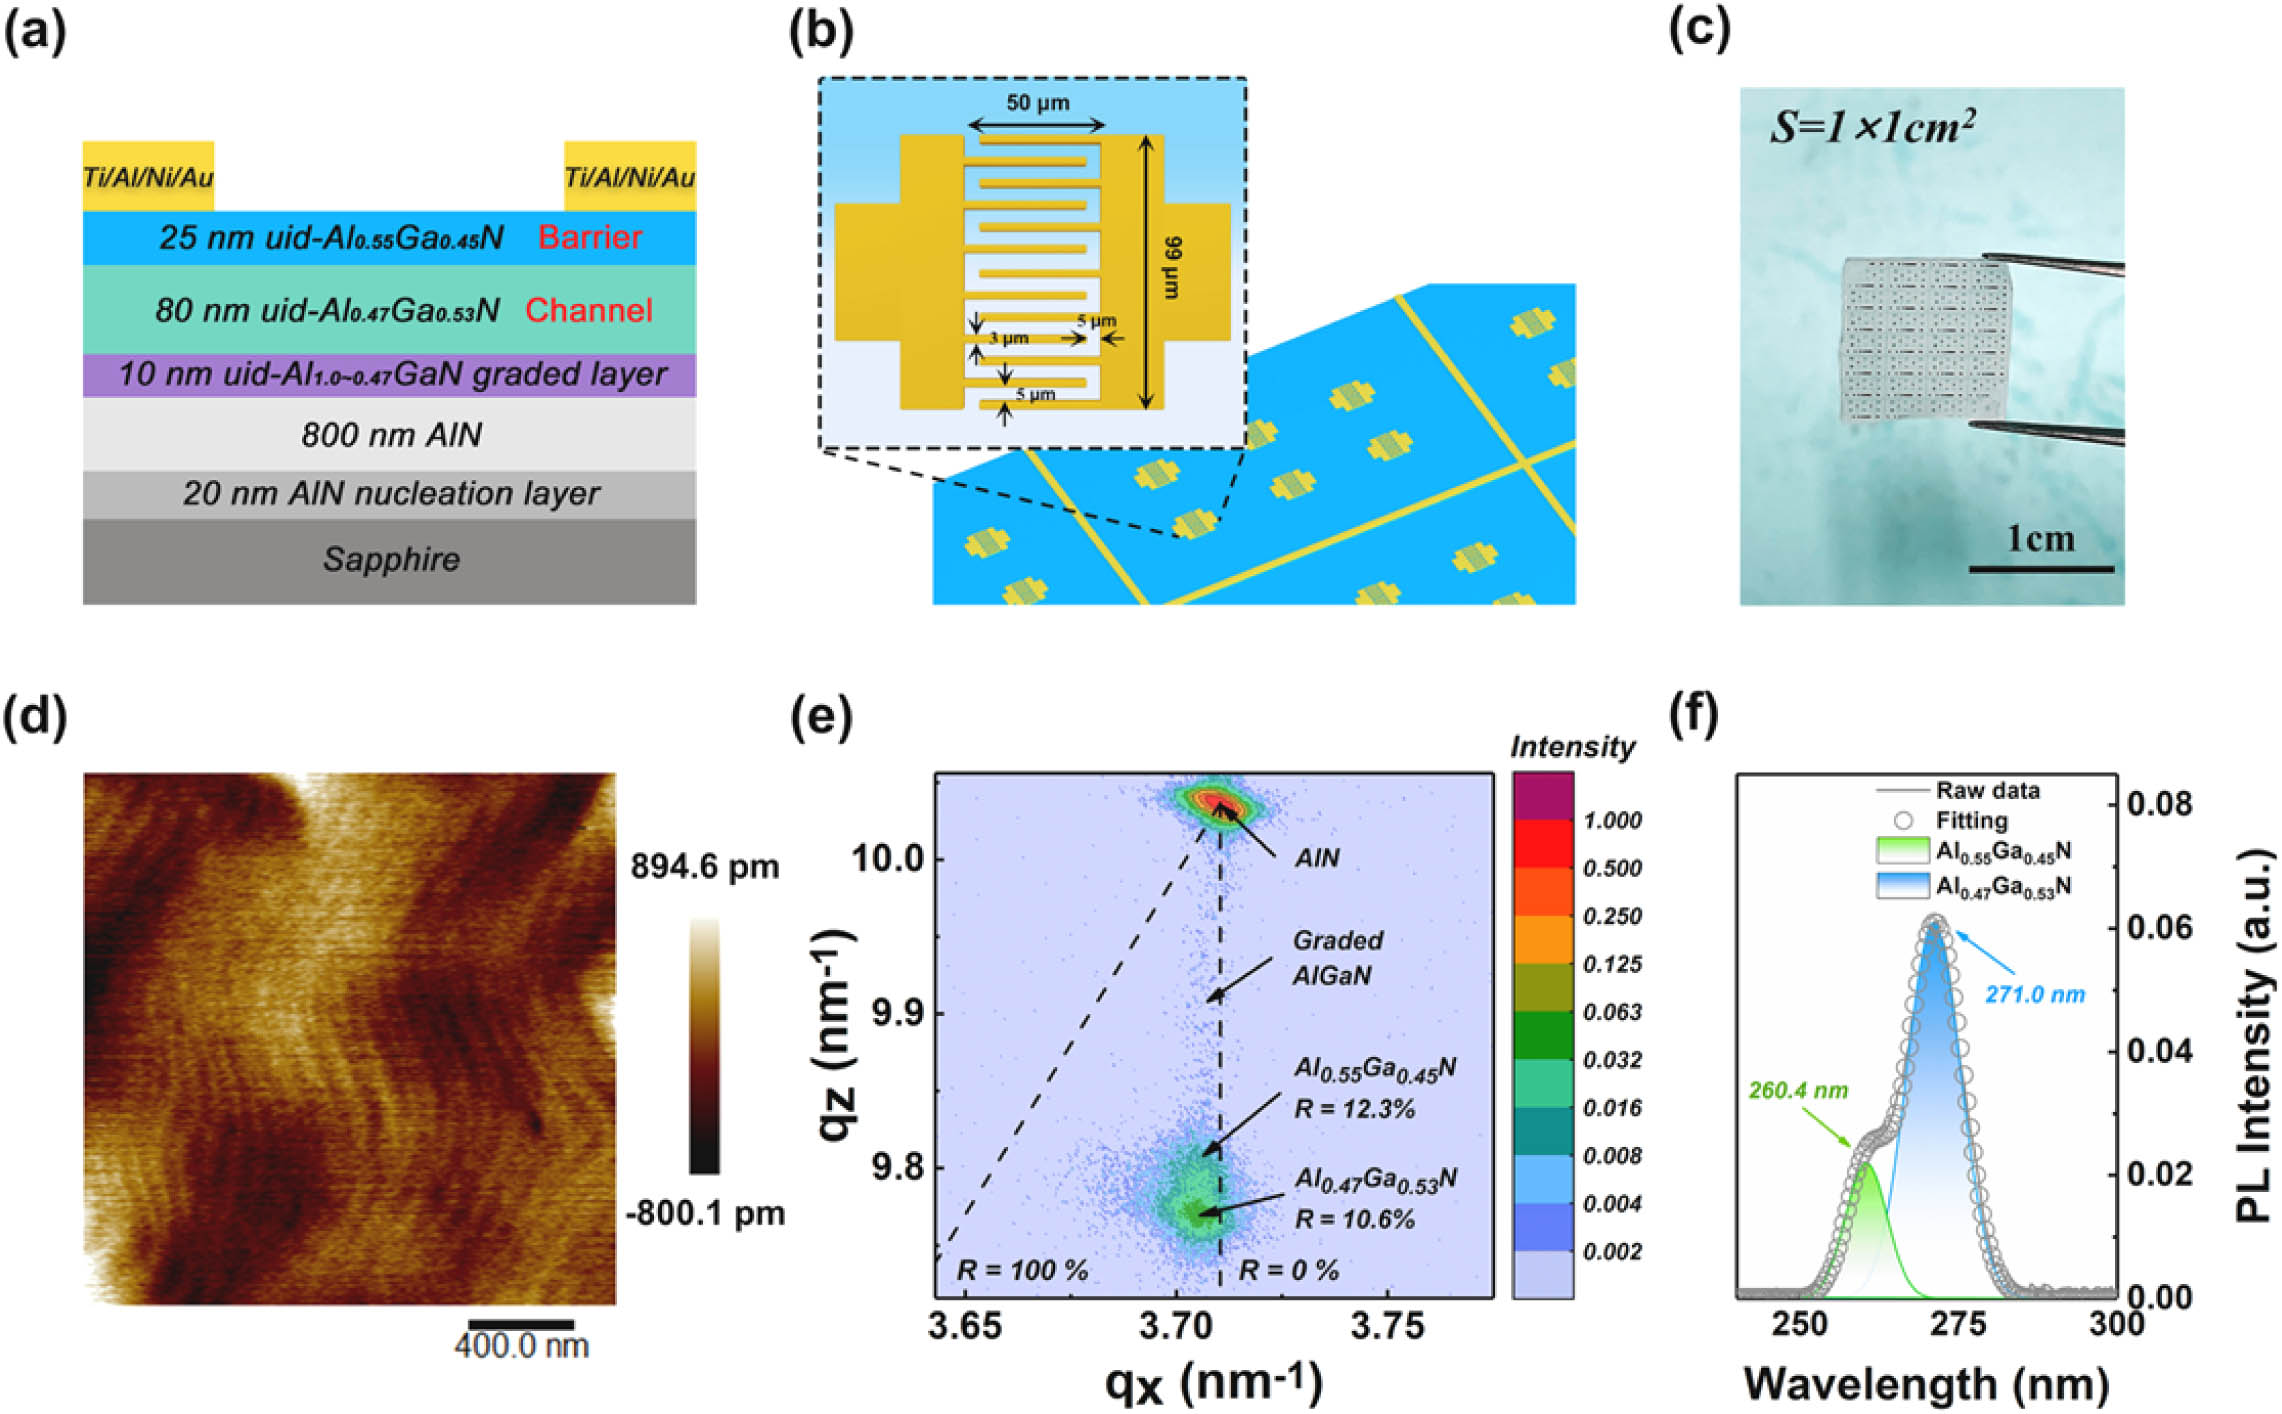 (a) Cross-sectional diagram of a phototransistor with ohmic-contact electrodes. (b) Configuration diagram of a planar phototransistor with interdigital electrodes. (c) Photograph of the planar interdigital electrode phototransistors on a chip with an area of 1 cm×1 cm. (d) AFM topography of sample surface with scanning area of 2 μm×2 μm. (e) XRD RSM of the sample recorded around (101¯5) reflection. The calculated full relaxation (R=100%) and full strain (R=0%) lines are also shown. (f) Room-temperature PL spectrum measured using a 213-nm laser as the excitation source.